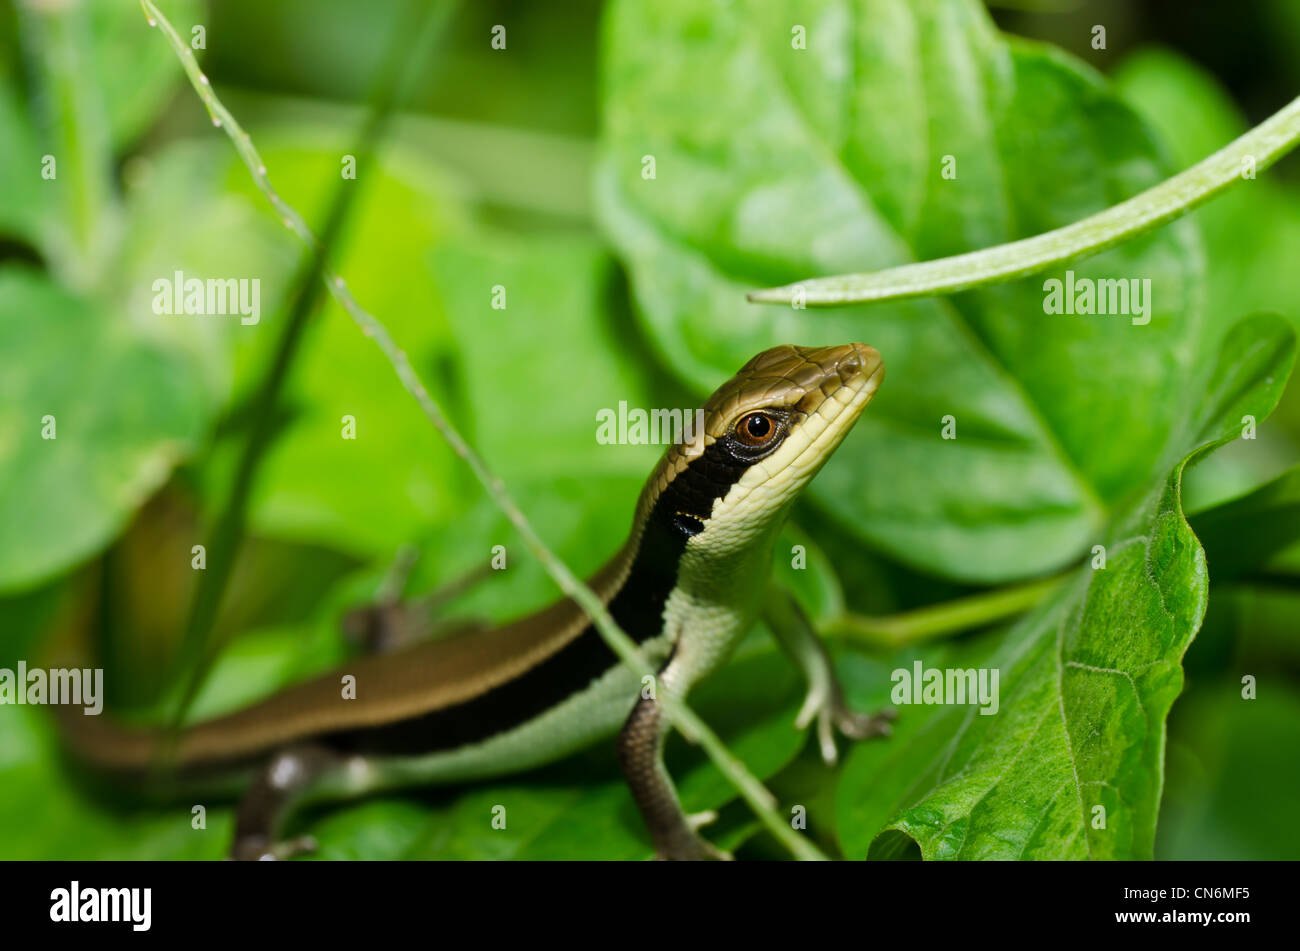 Skink in garden or in green nature Stock Photo